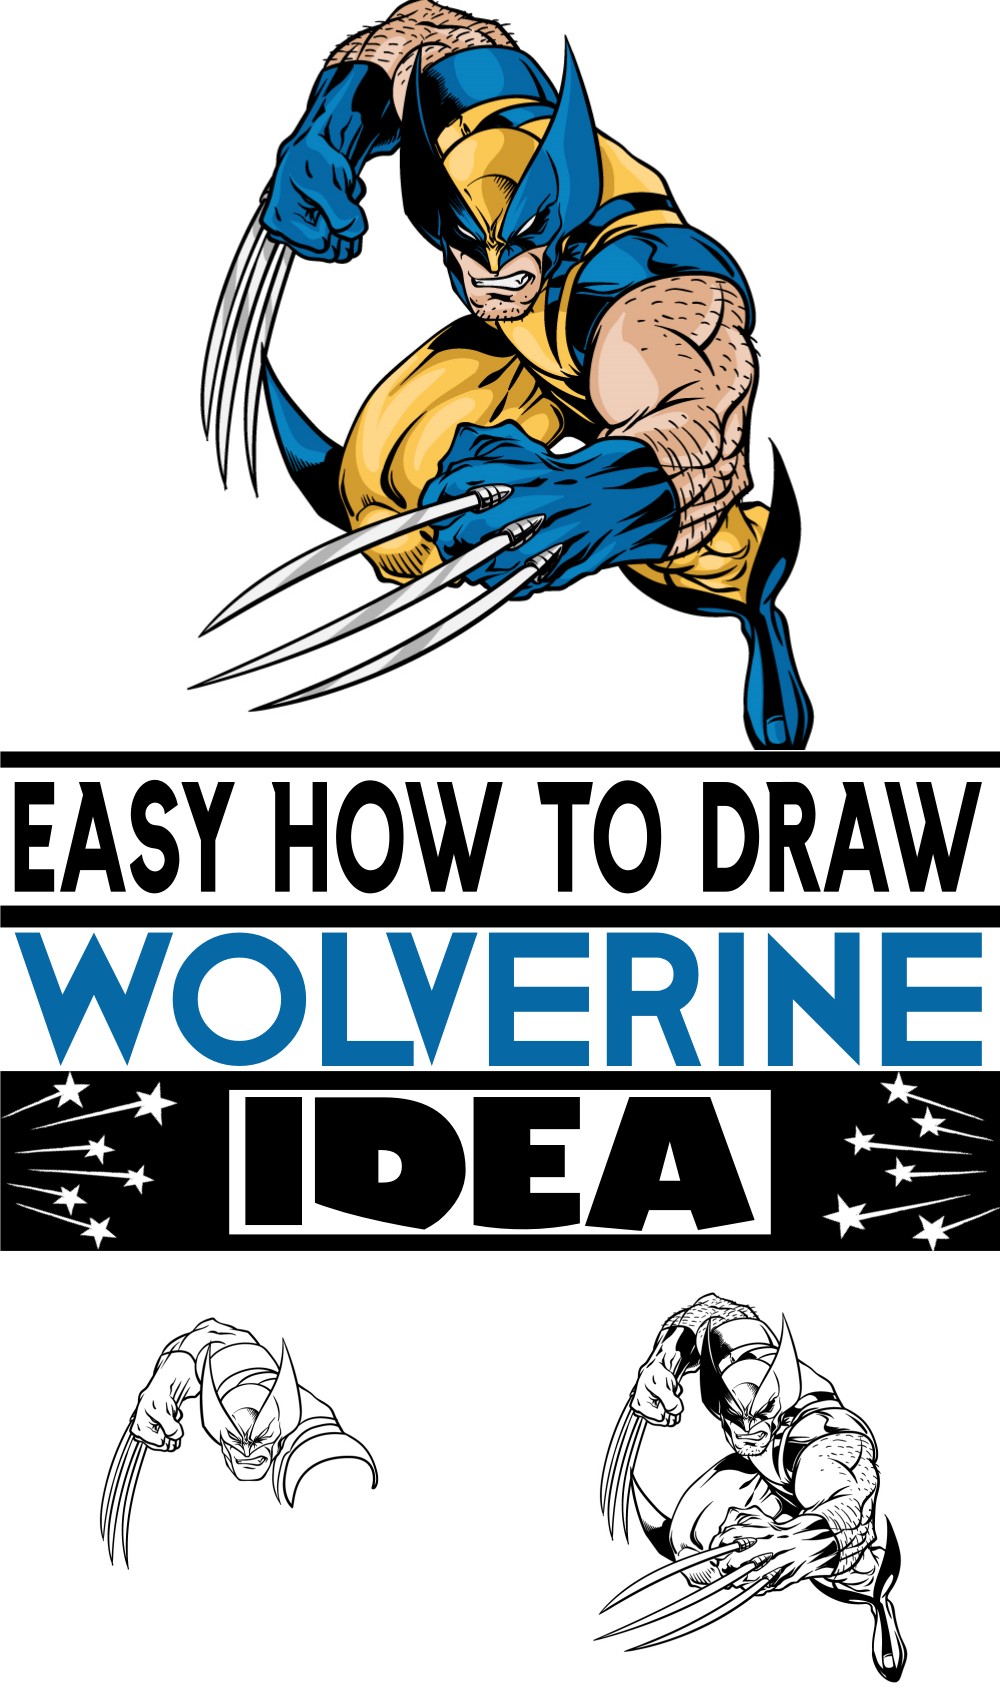 Easy How To Draw Wolverine